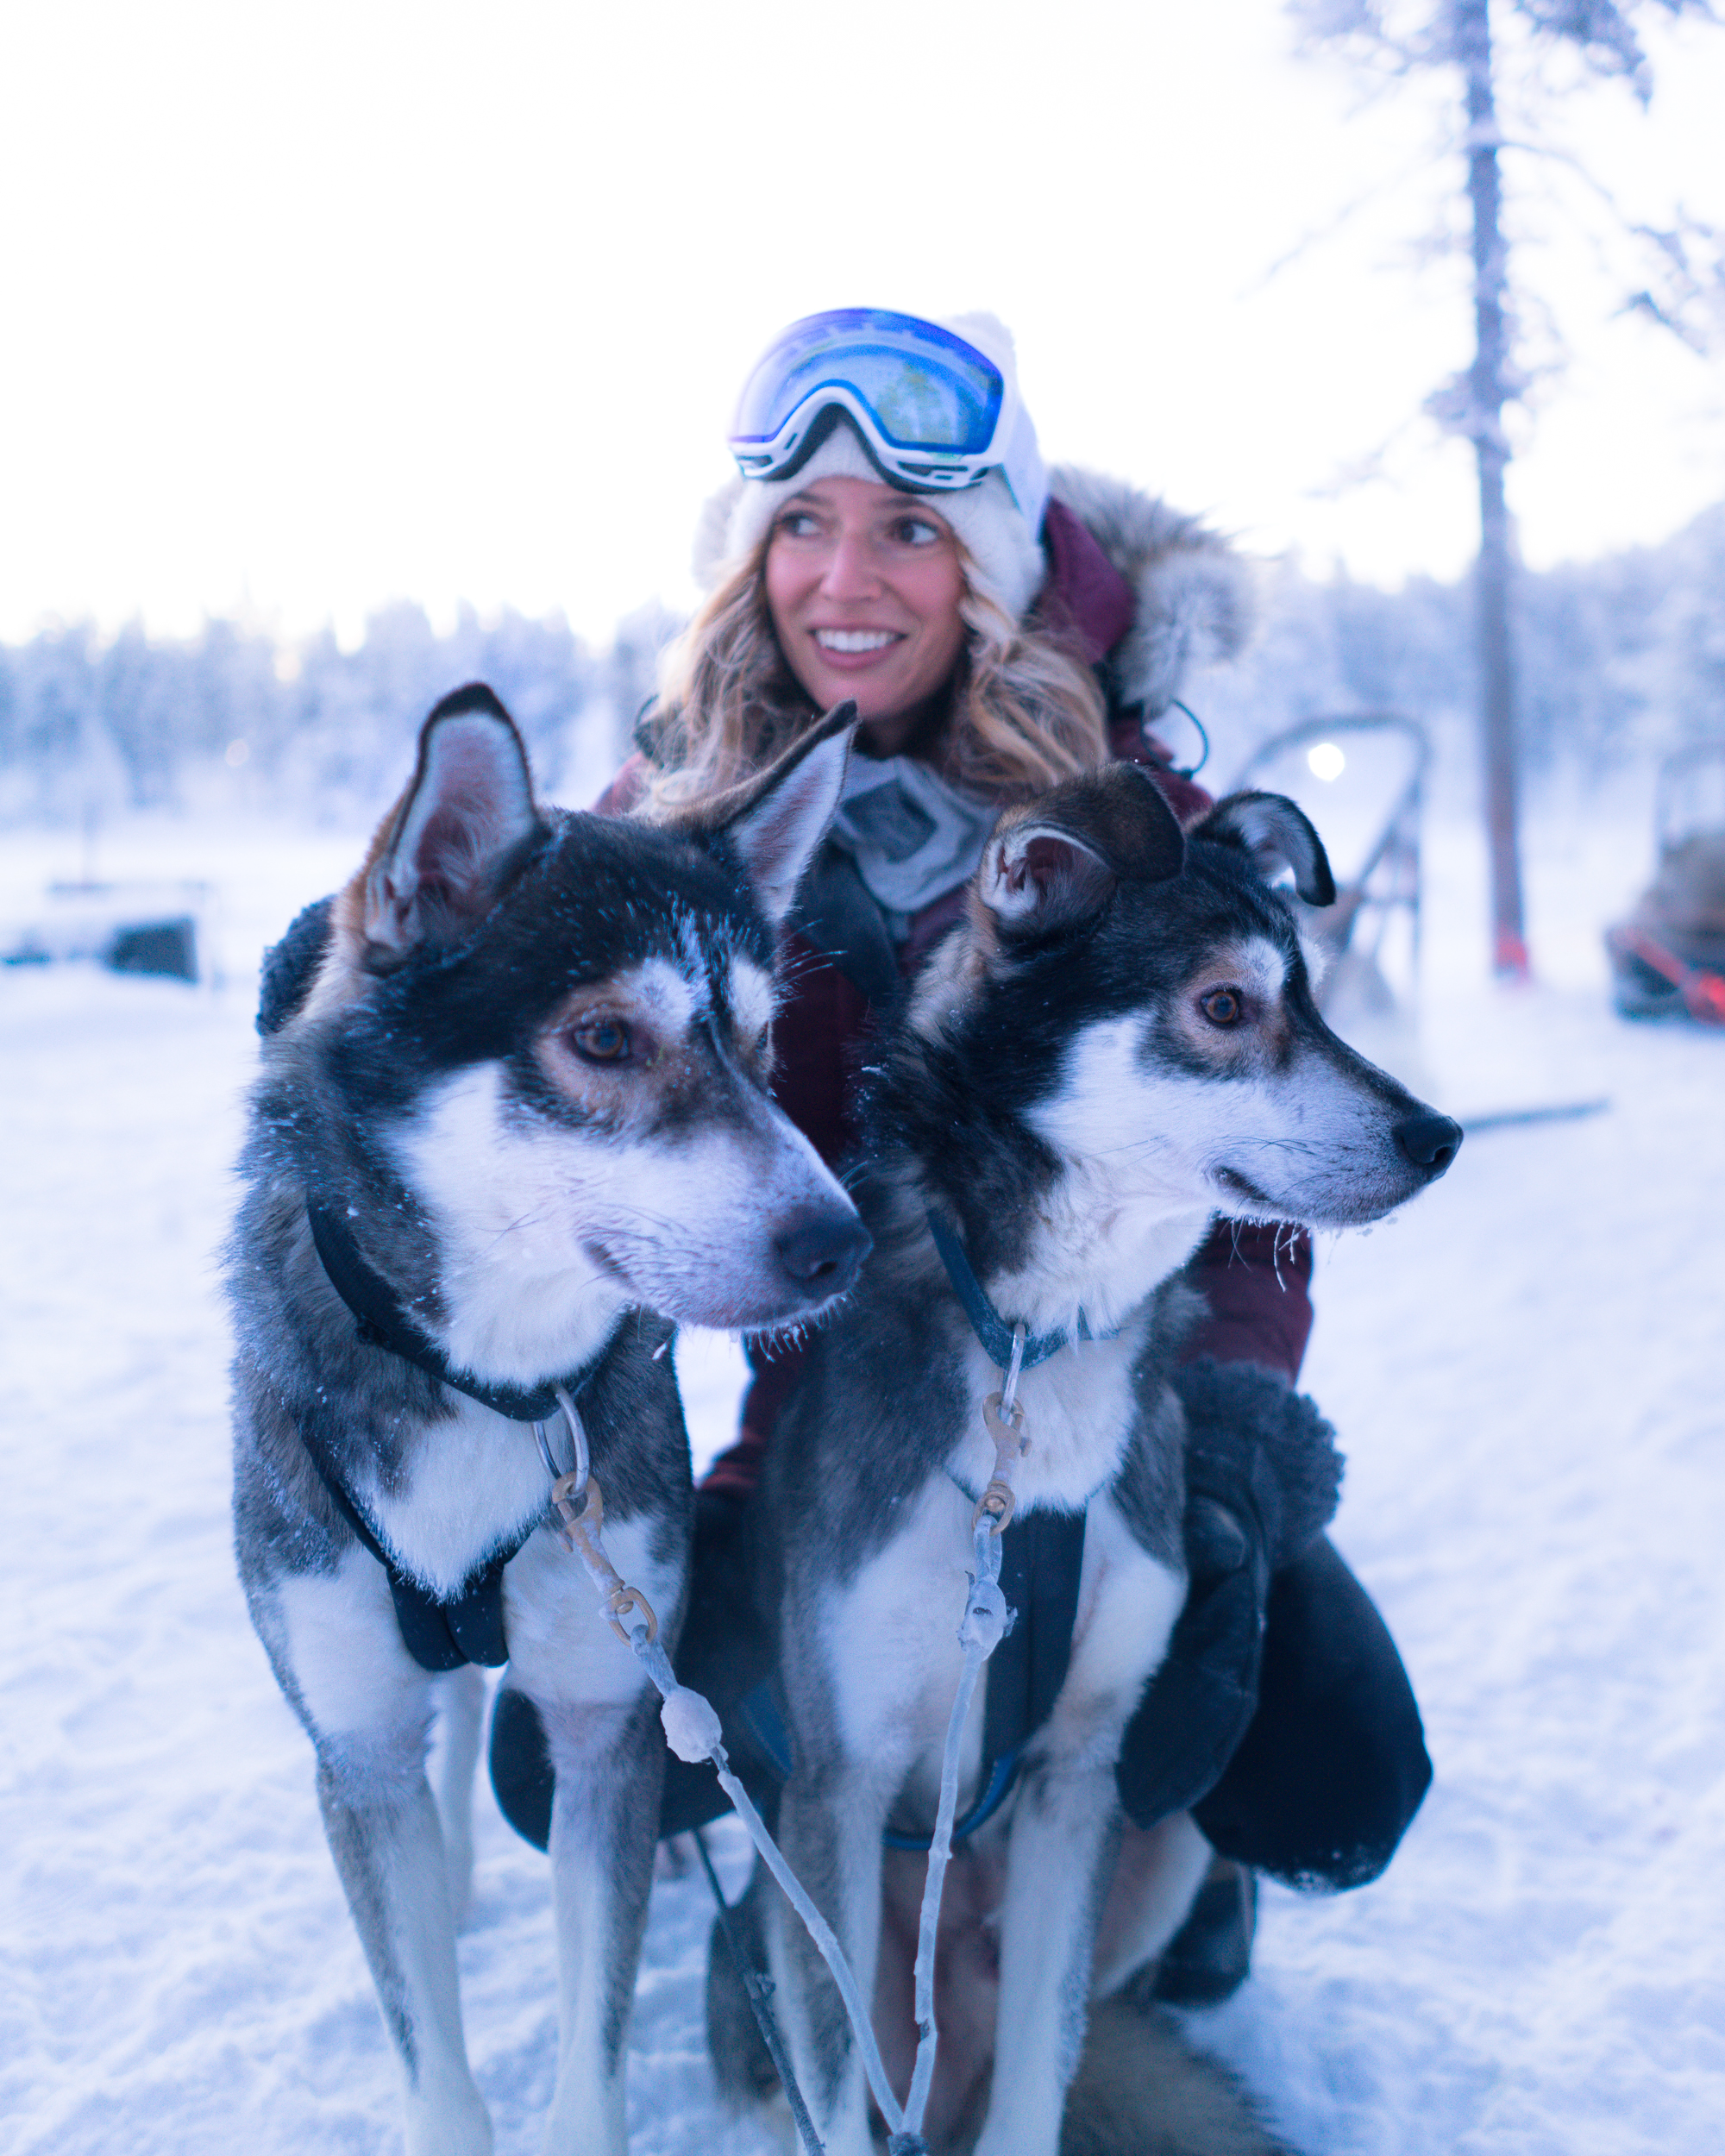 Dog sledding is a traditional part of Finnish culture.